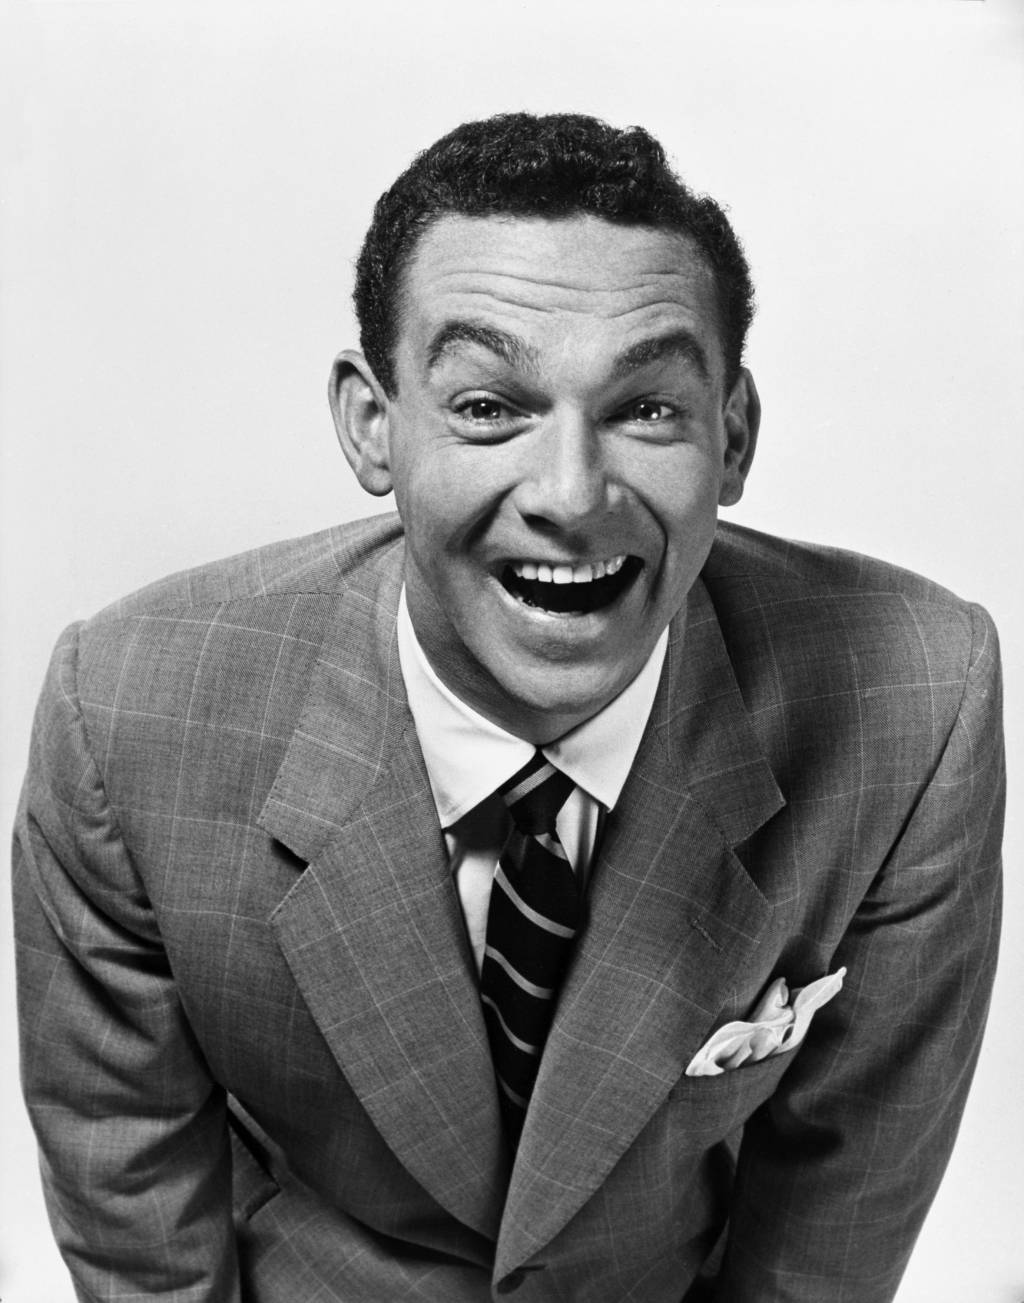 June 28, 2015: Rapid-fire comedian and frequent guest on The Ed Sullivan Show, Jack Carter died of respiratory failure. He was 93. During his long career, which began just after World War 2, Carter appeared in everything from Broadway's Call me Mister to Showtime's Shameless. He attended the Academy of Dramatic Art, at first intending to become a dramatic actor, but found his home in comedy.

Carter spent two years hosting NBC's Cavalcade of Stars before getting his own show, The Jack Carter Show, which ran for three seasons. He appeared in Laugh-In, Match Game, along with a myriad of other successful TV comedies. Carter even made a few forays into film, with parts in Viva Las Vegas and Mel Brooks' History of the World, Part I.